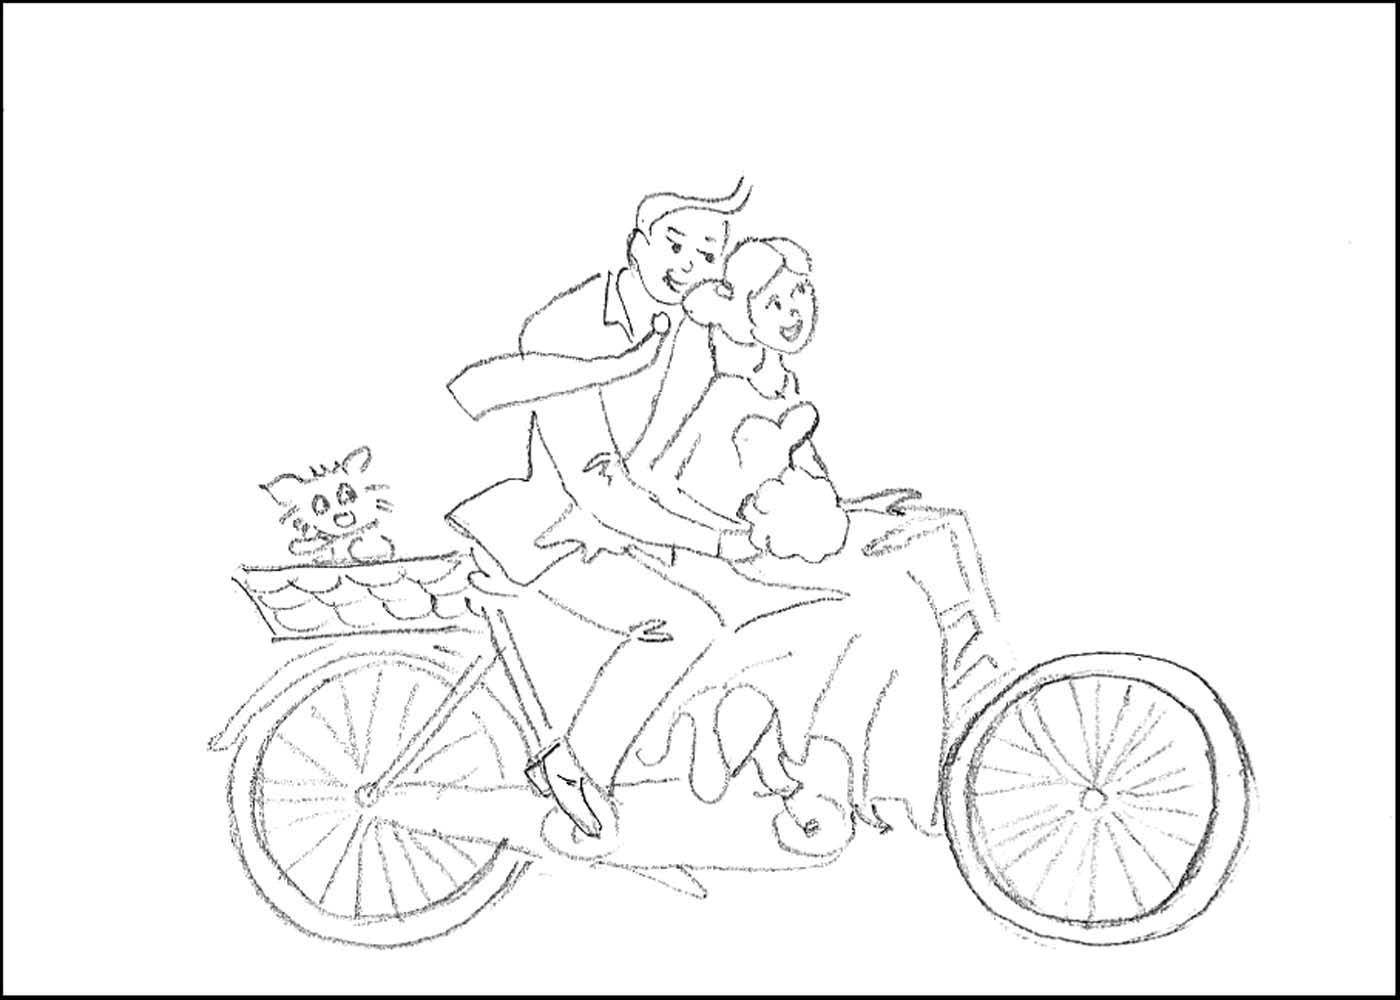 Coloring The couple on the bike. Category Wedding. Tags:  Wedding, dress, bride, groom.